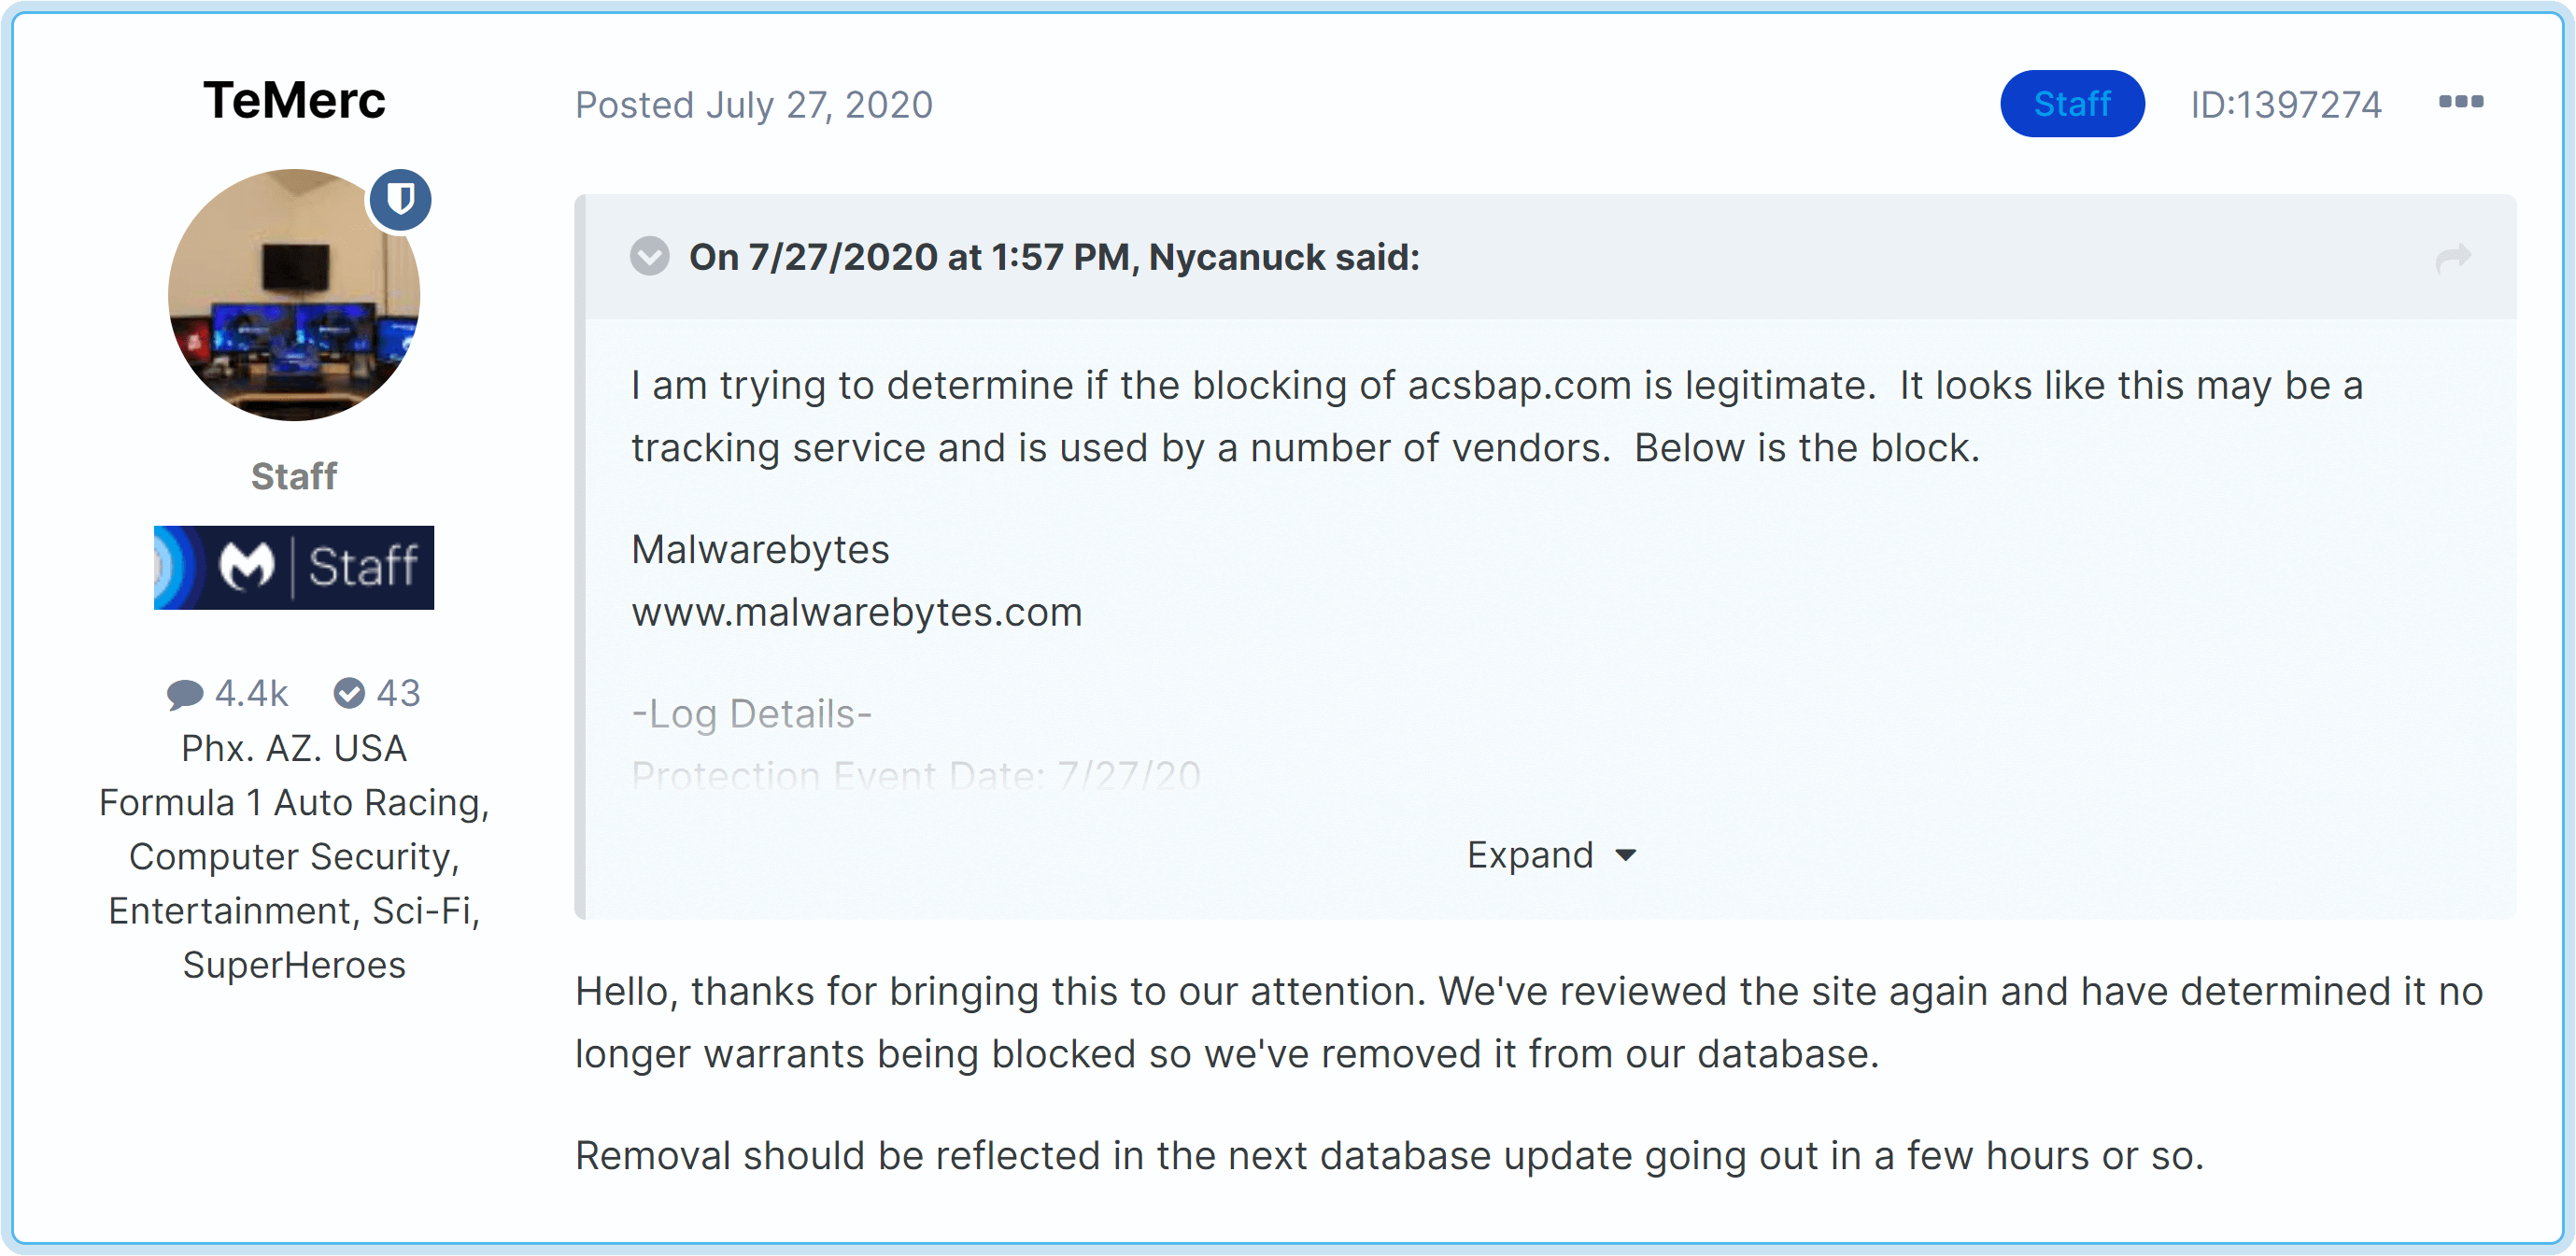 On July 27, 2020, Nycanuck said: I am trying to determine if the blocking of acsbap.com is legitimate.  It looks like this may be a tracking service and is used by a number of vendors. Below is the block. Malware Bytes staff responds: Hello, thanks for bringing this to our attention. We've reviewed the site again and have determined it no longer warrants being blocked so we've removed it from our database. Removal should be reflected in the next database update going out in a few hours or so.